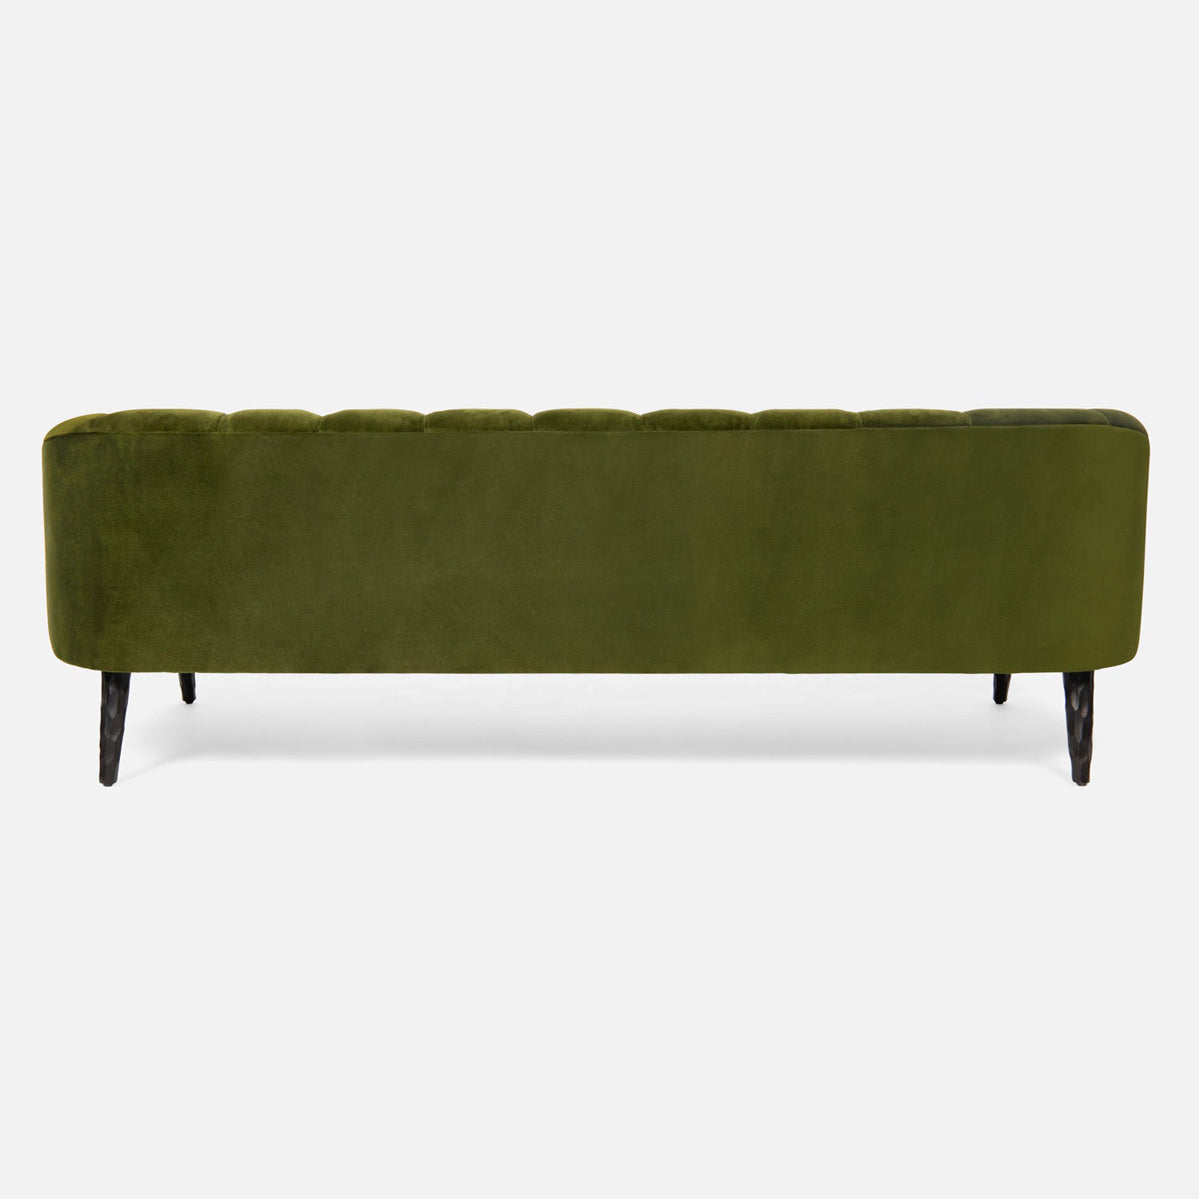 Made Goods Rooney Upholstered Shell Sofa in Humboldt Cotton Jute